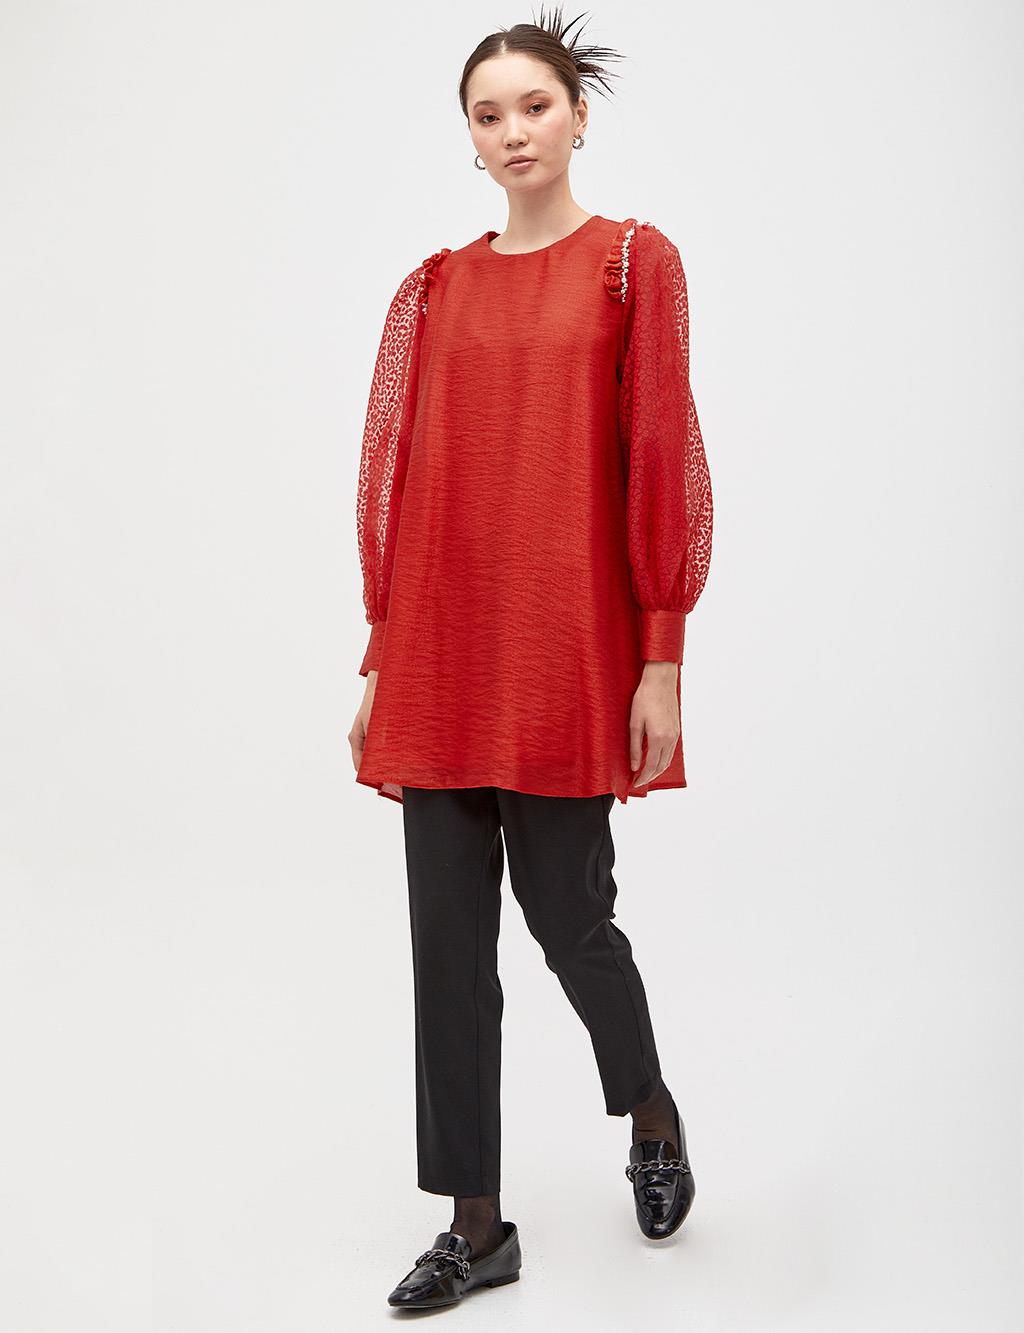 Bead Embroidered Frilly Tunic Red